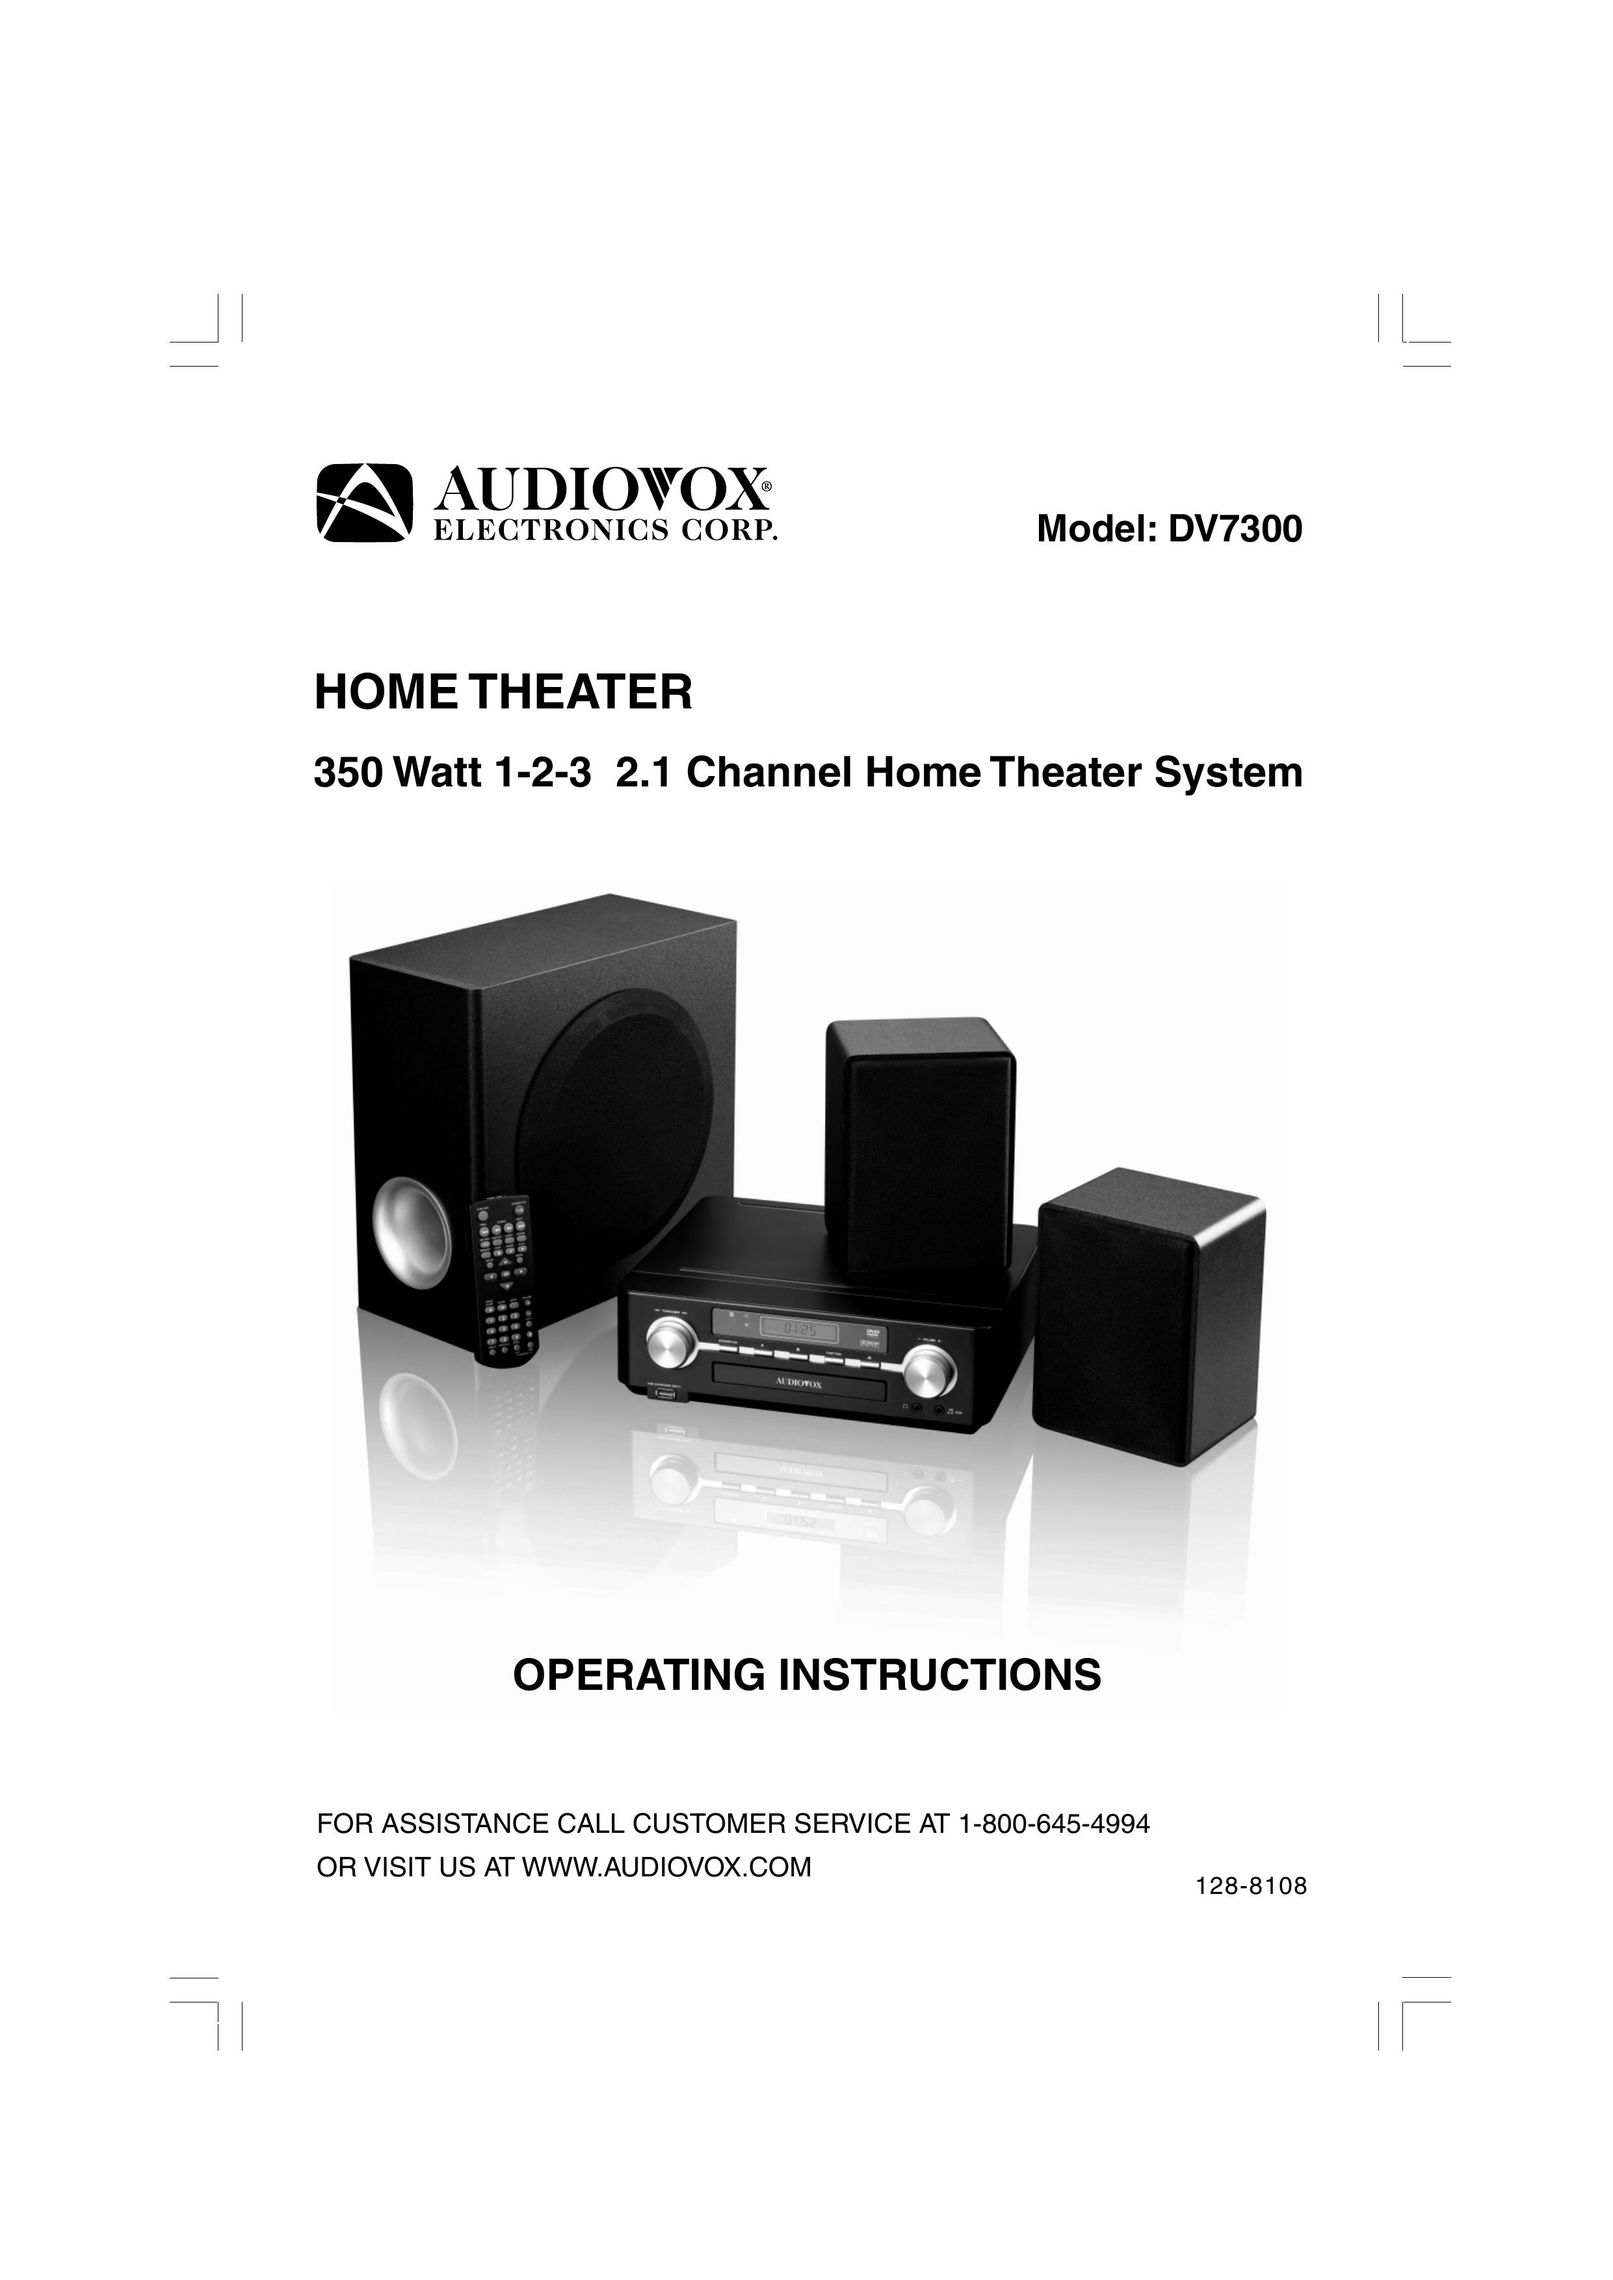 Audiovox DV 7300 Home Theater System User Manual